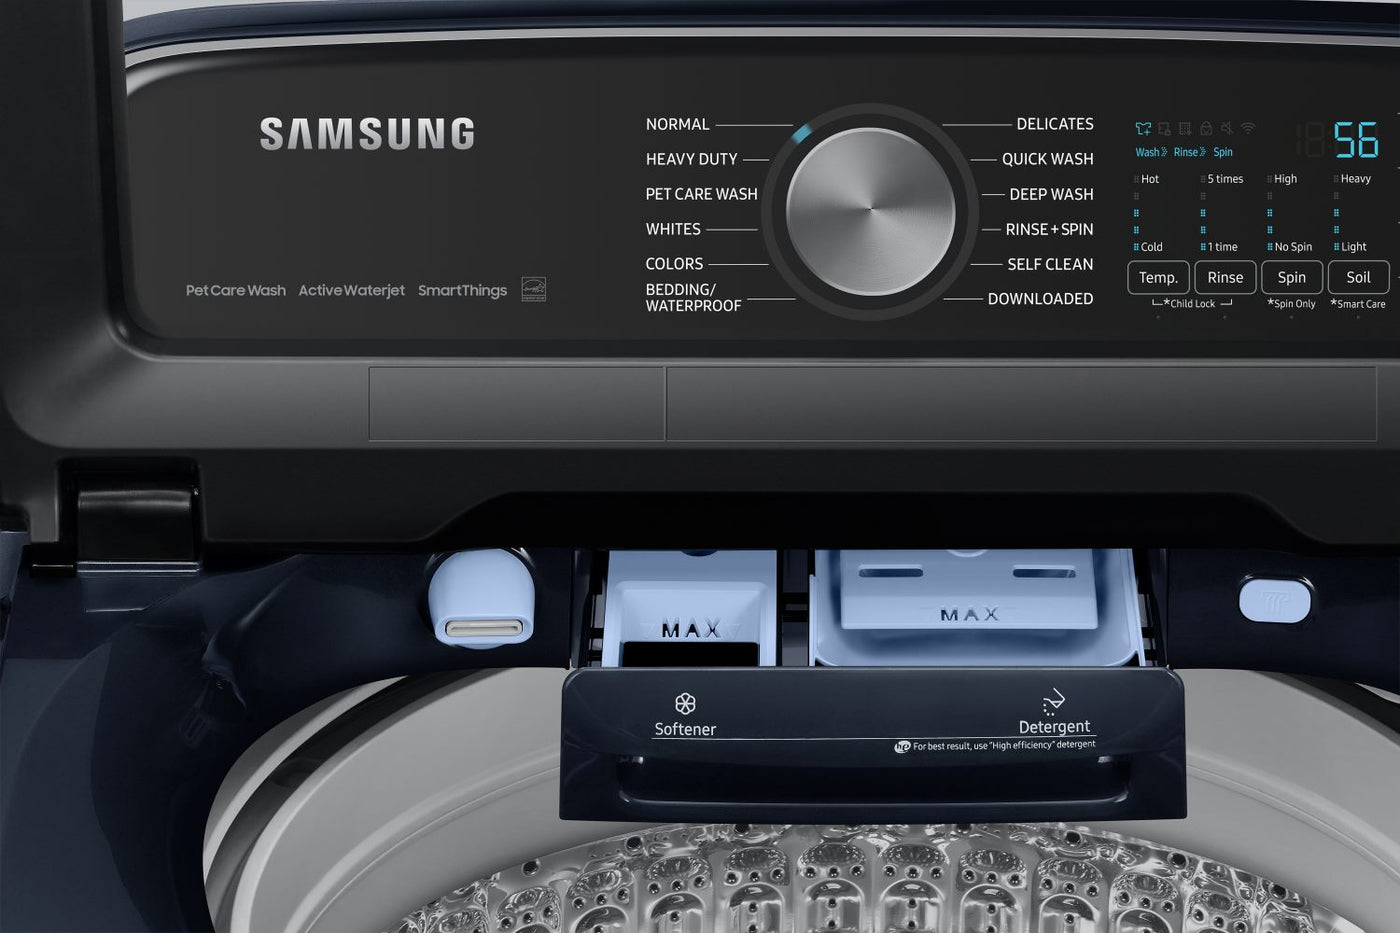 Samsung Navy Top Load Washer with Pet Care and Agitator (6.1cu.ft) & Smart Dryer with Pet Care (7.4cu.ft) - WA53CG7155ADA4/DVE54CG7155DAC